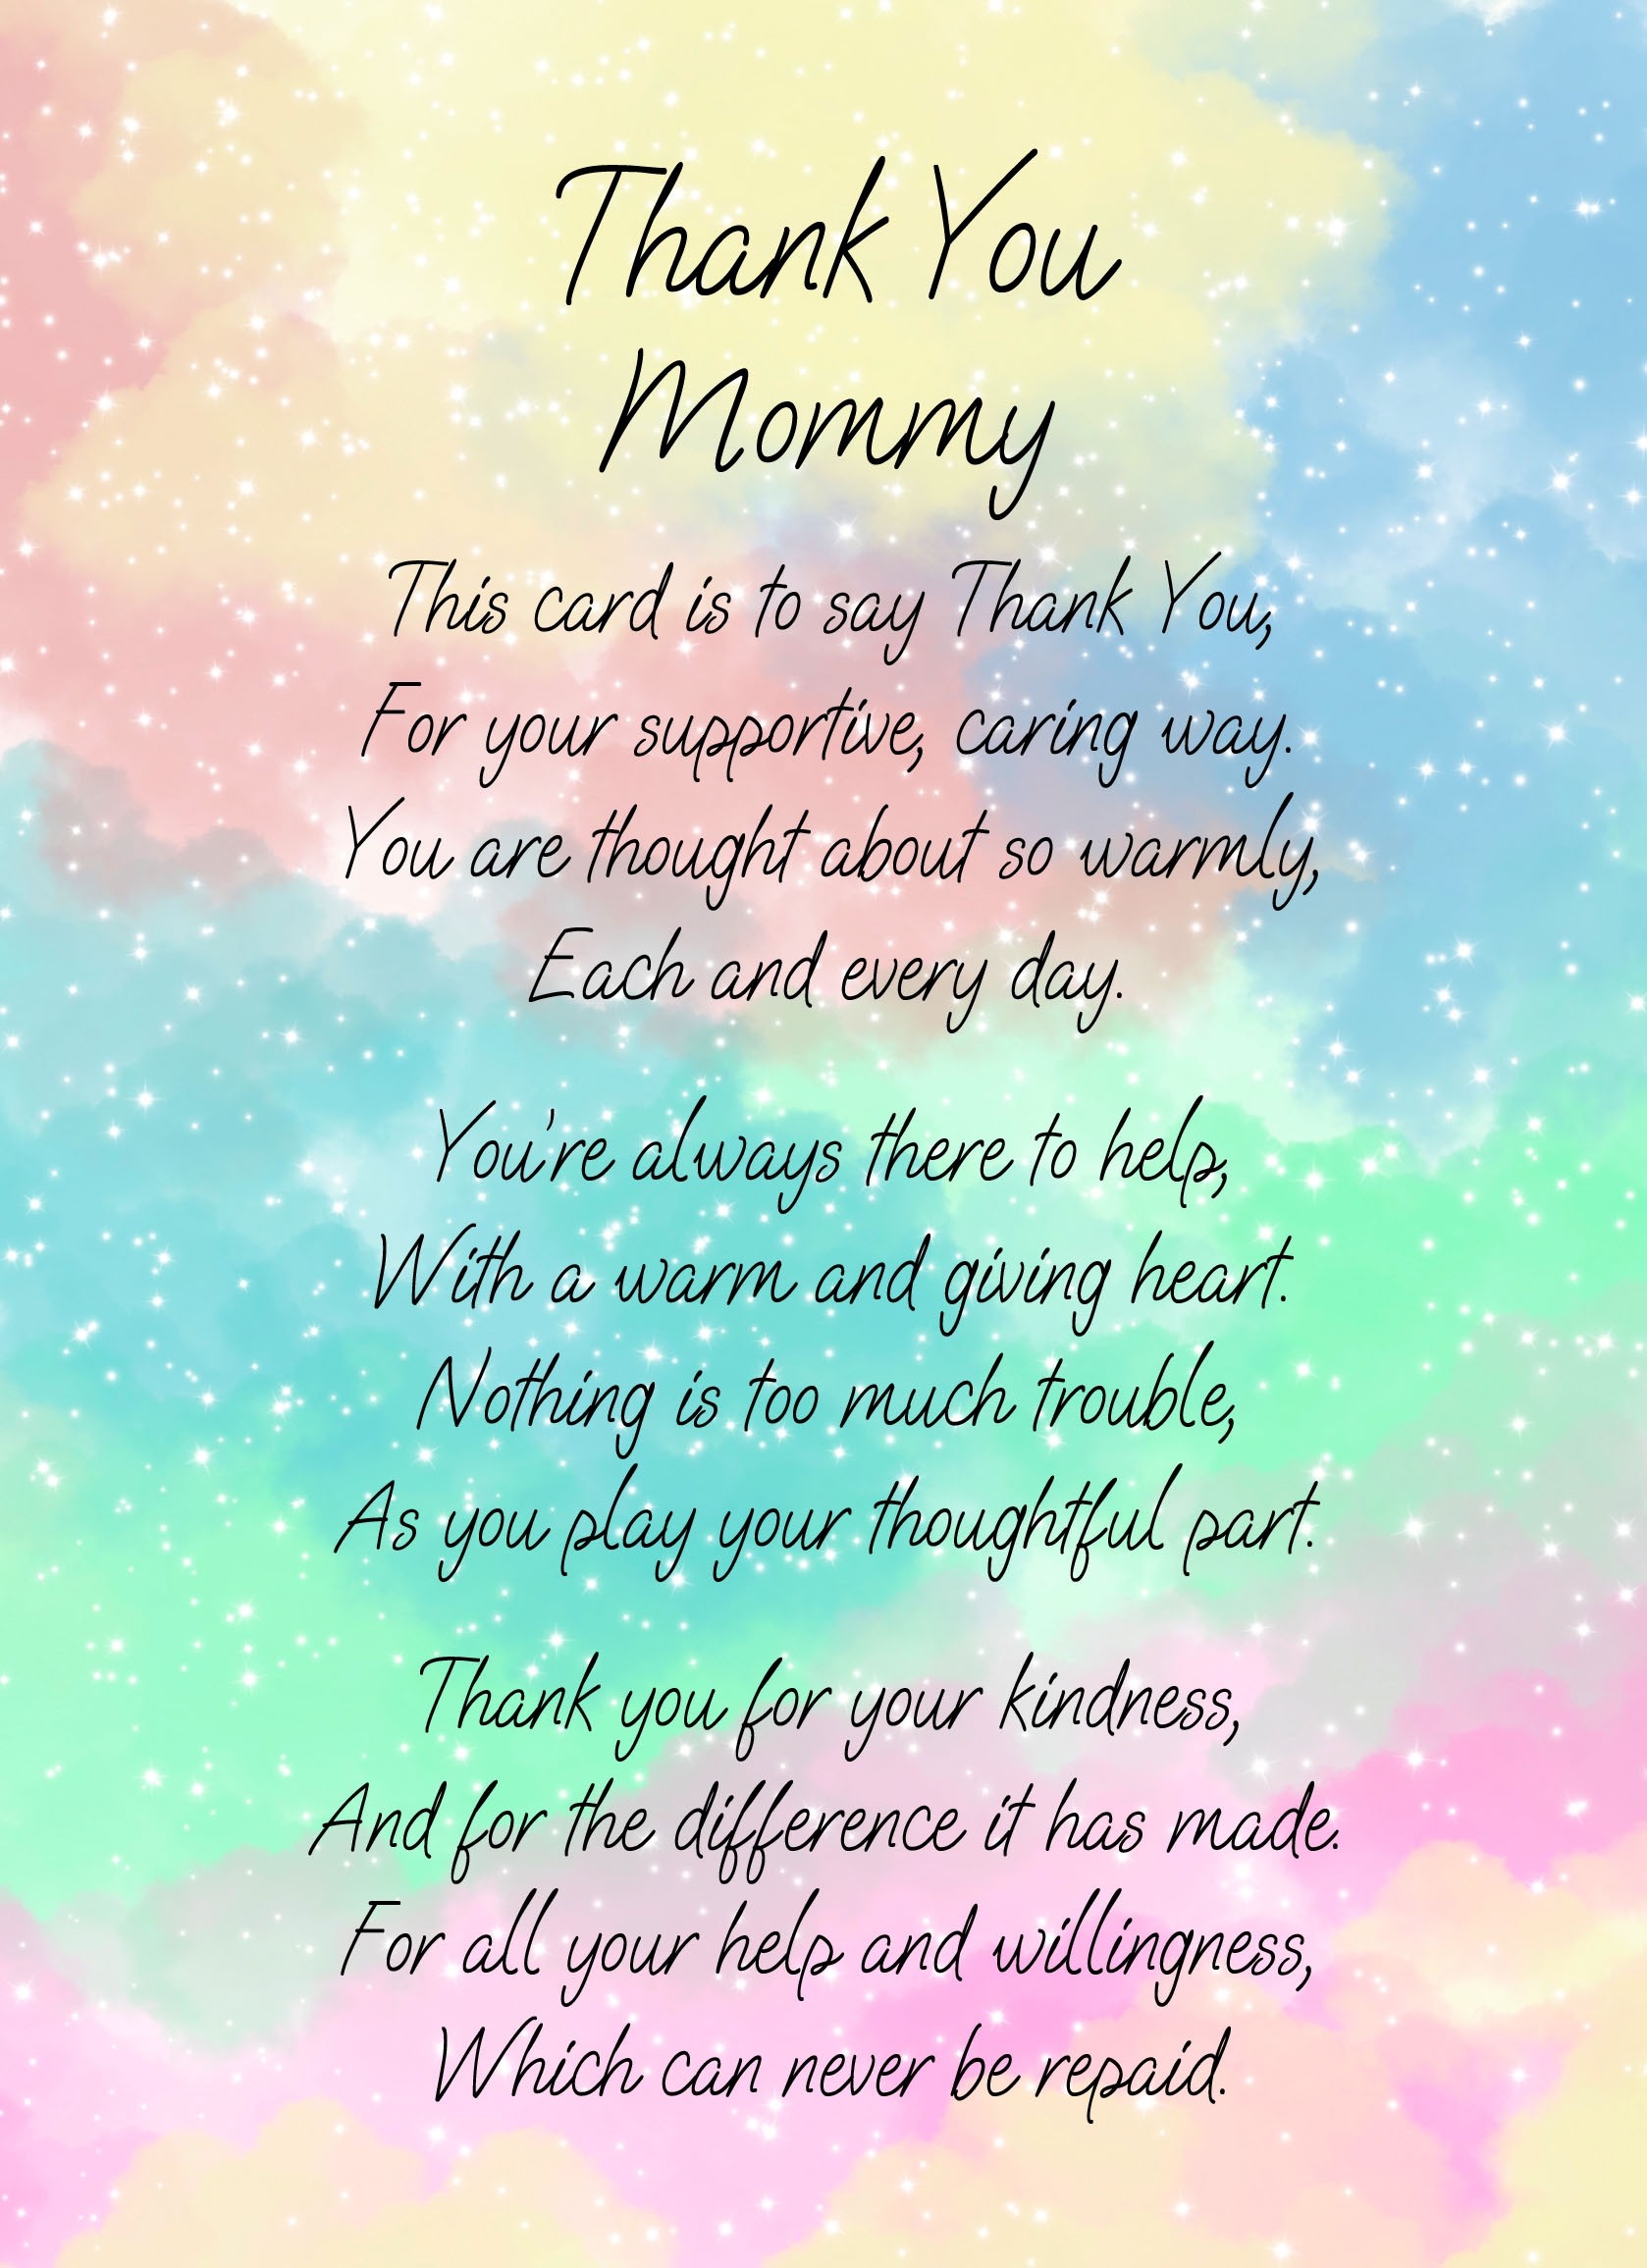 Thank You Poem Verse Card For Mommy